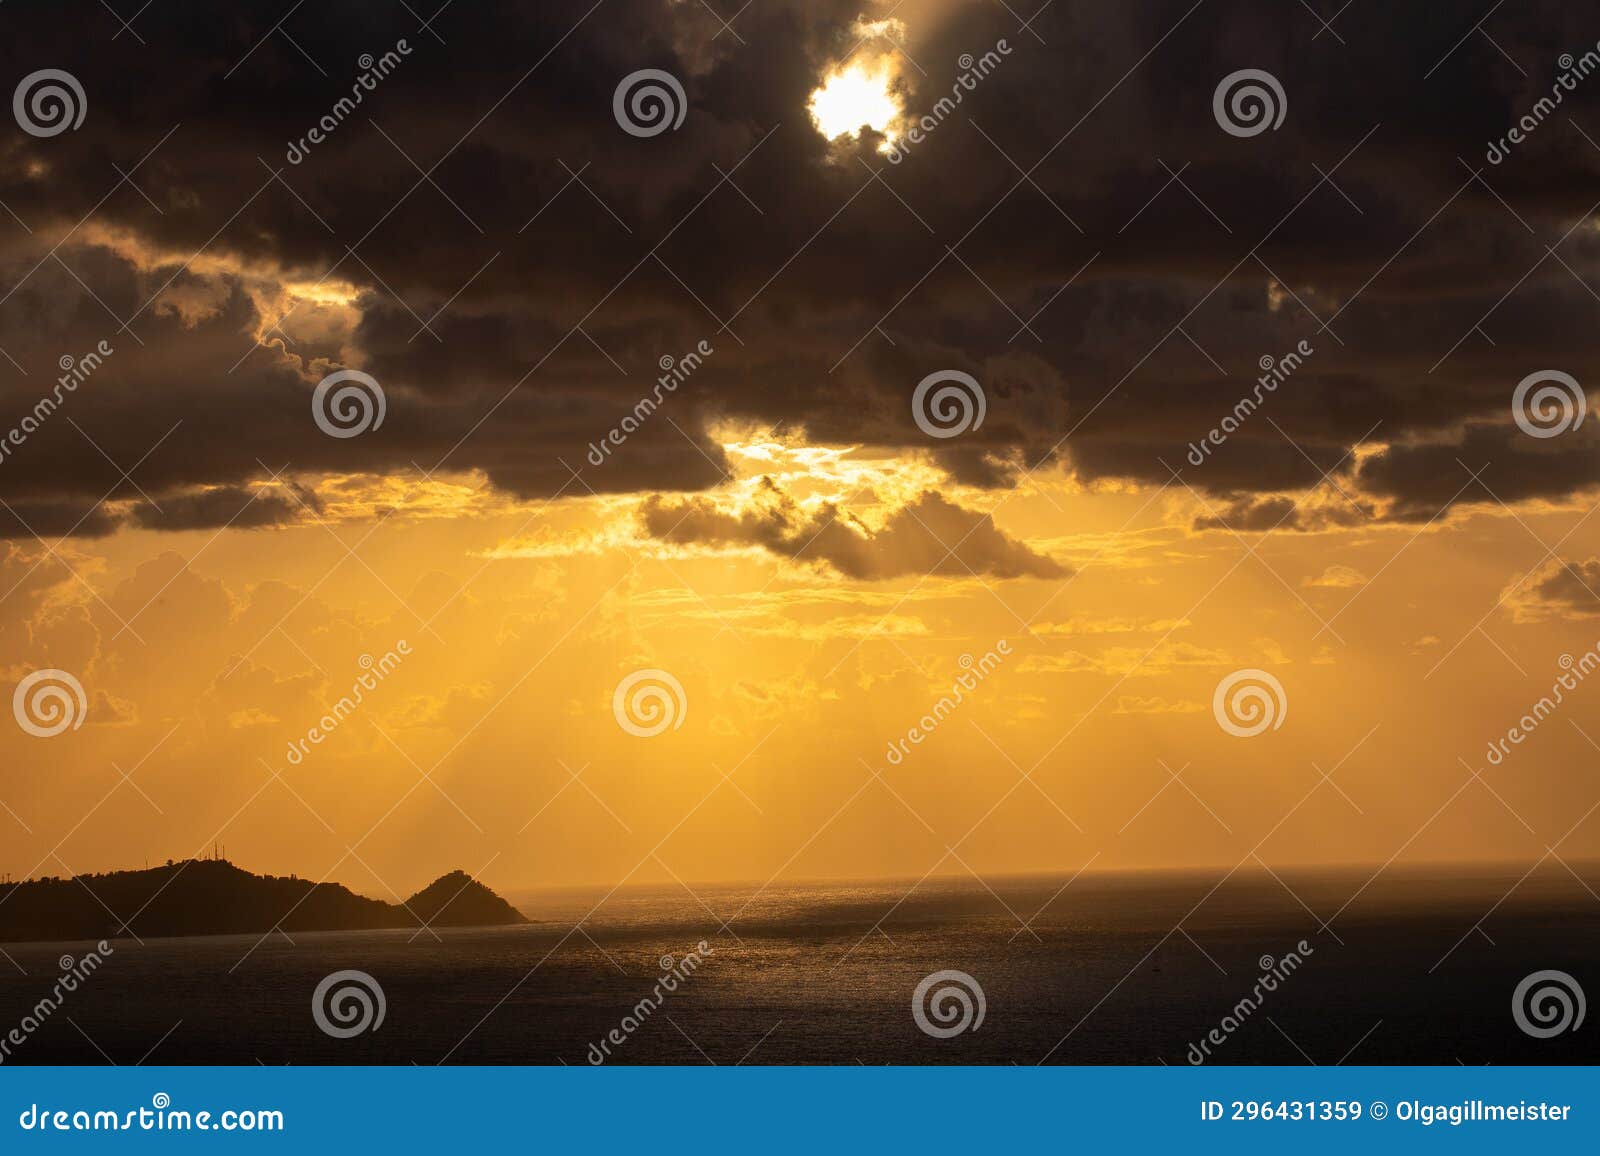 atmospheric sunset on the tyrrhenian coast in the bay of gioiosa marea (province of messina) sicily, italy